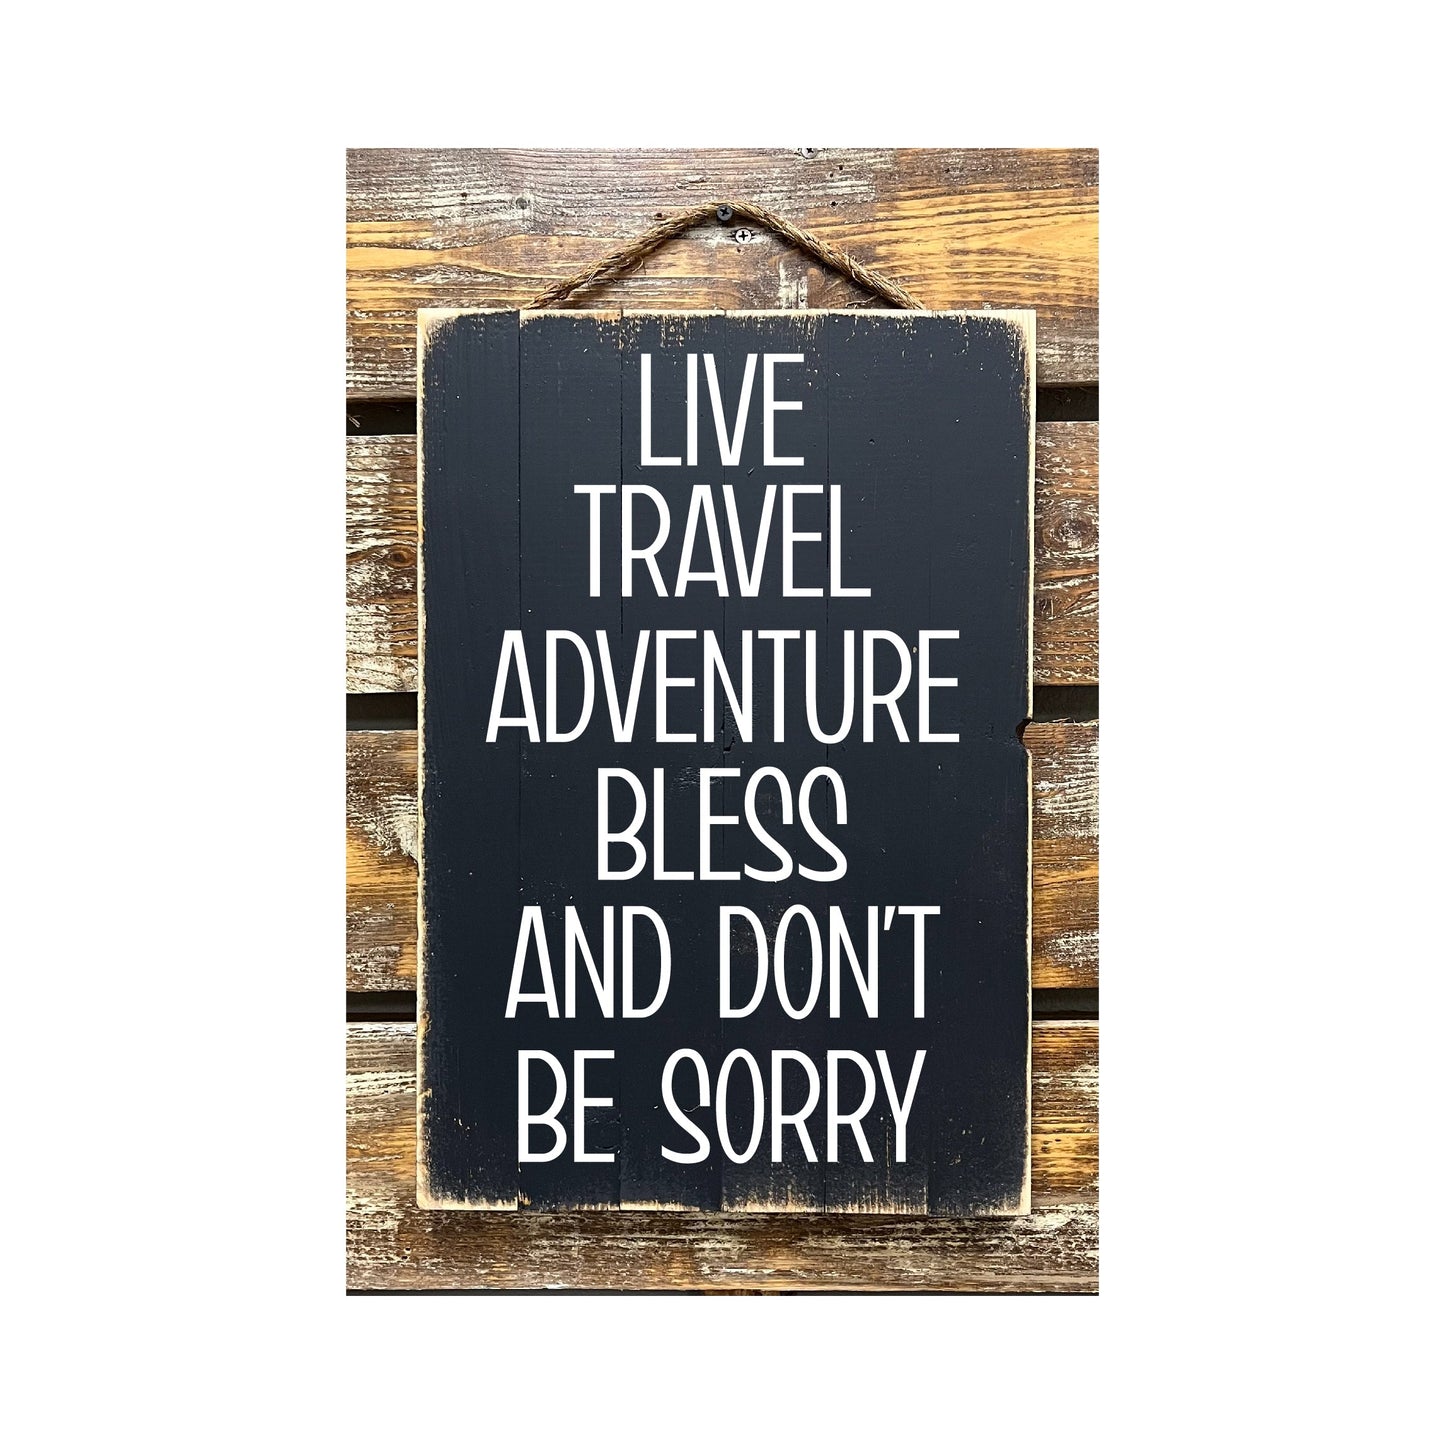 Live Travel Adventure Bless And Don't Be Sorry